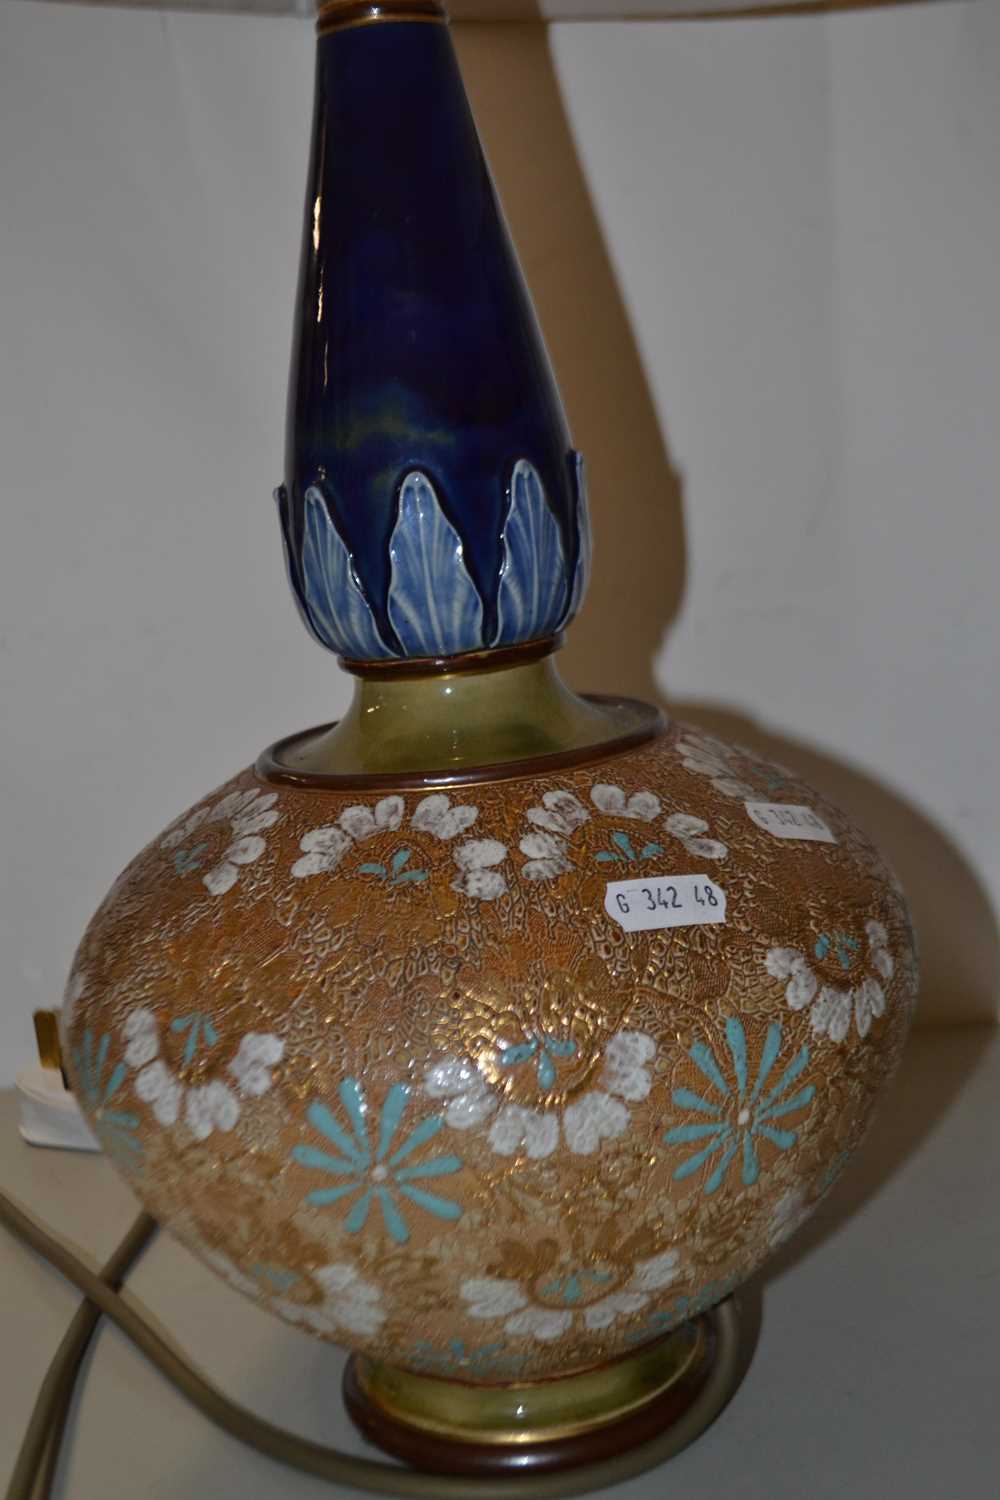 Pair of Royal Doulton stone ware vases converted to table lamps - Image 2 of 2